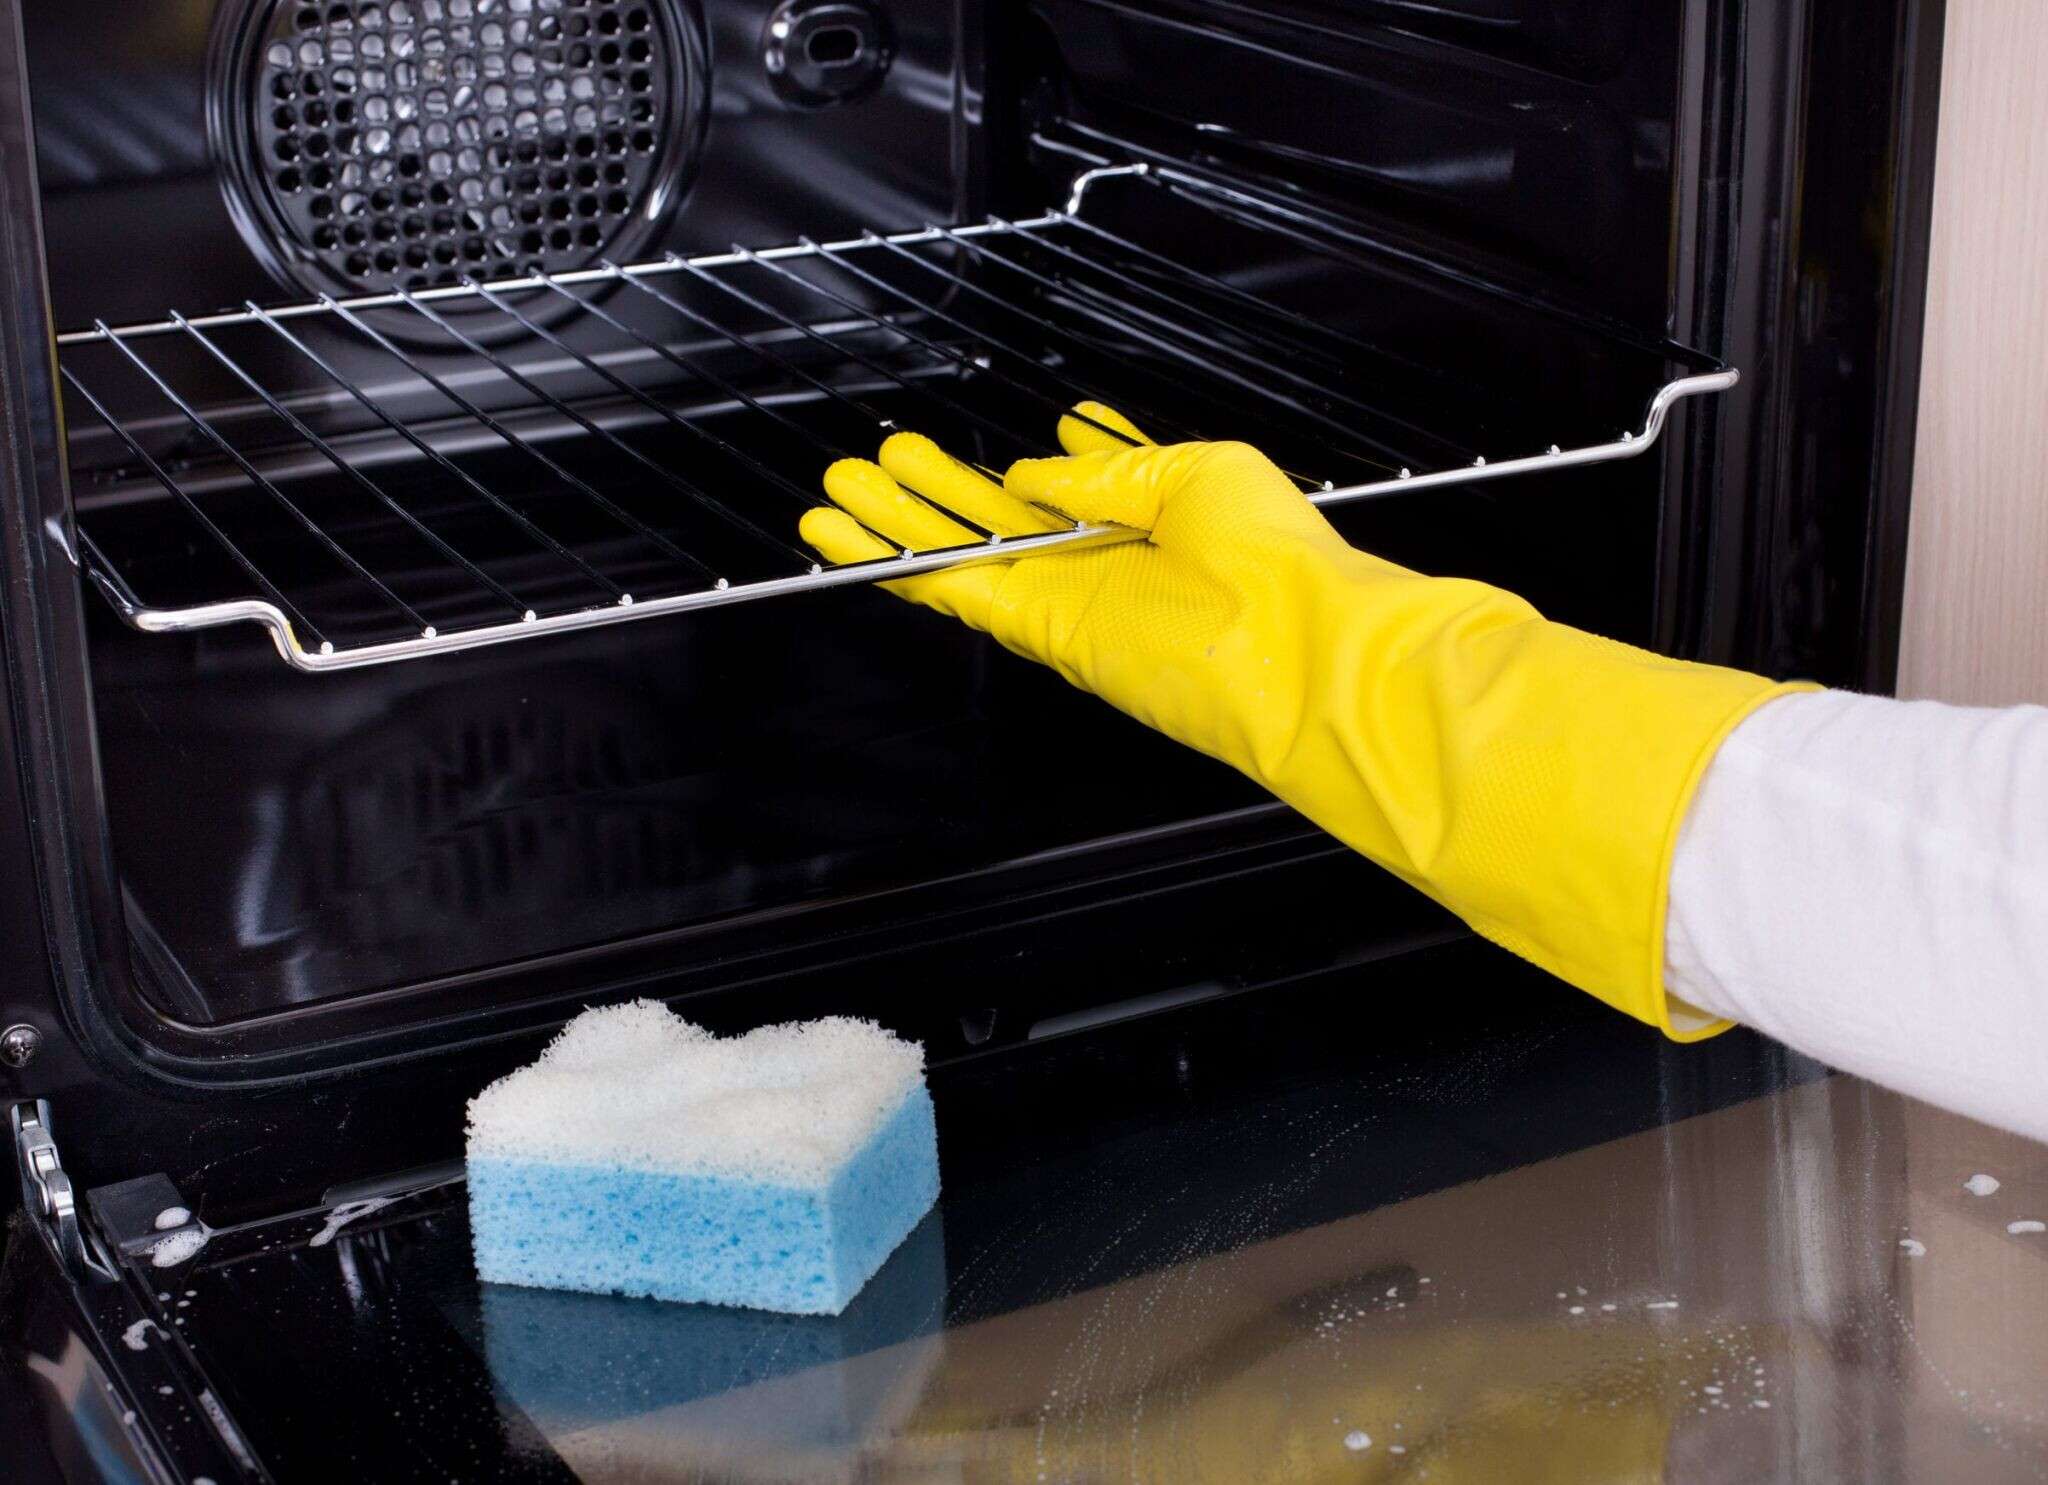 50443286 - close up of female hand with yellow protective gloves cleaning oven